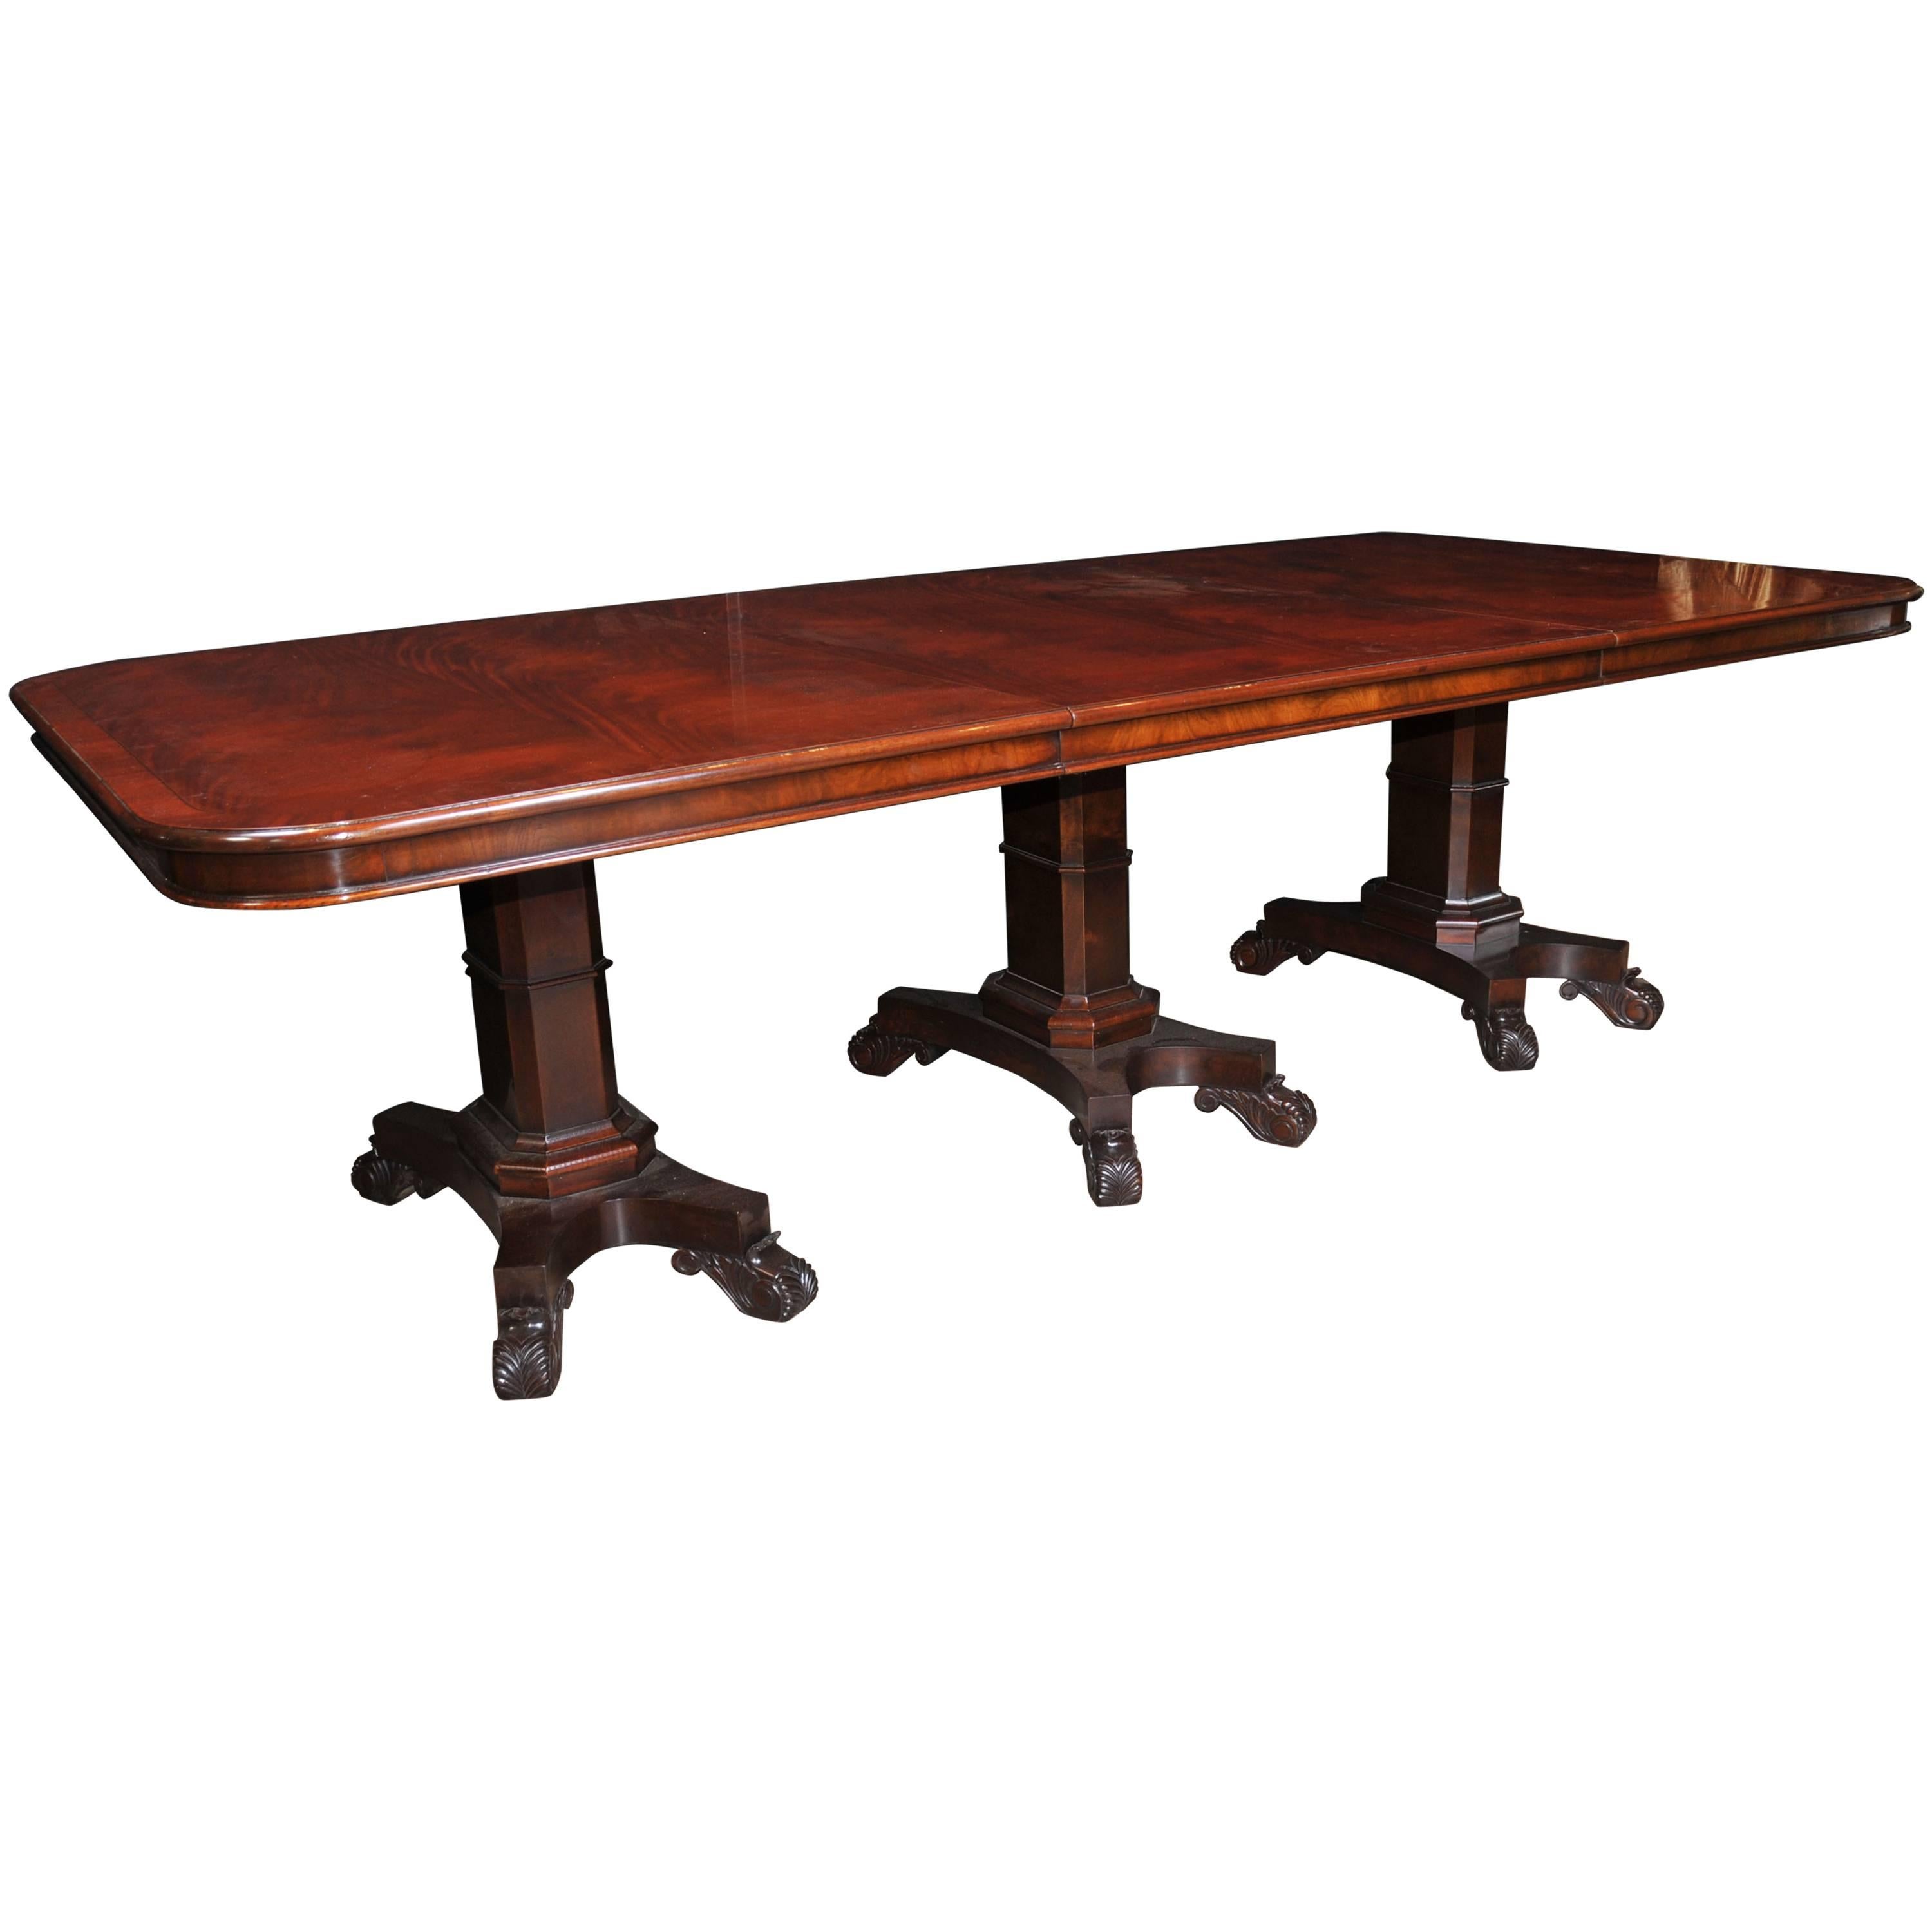 Regency Style Dining Table Mahogany Triple Pedestal Manner George Bullock For Sale